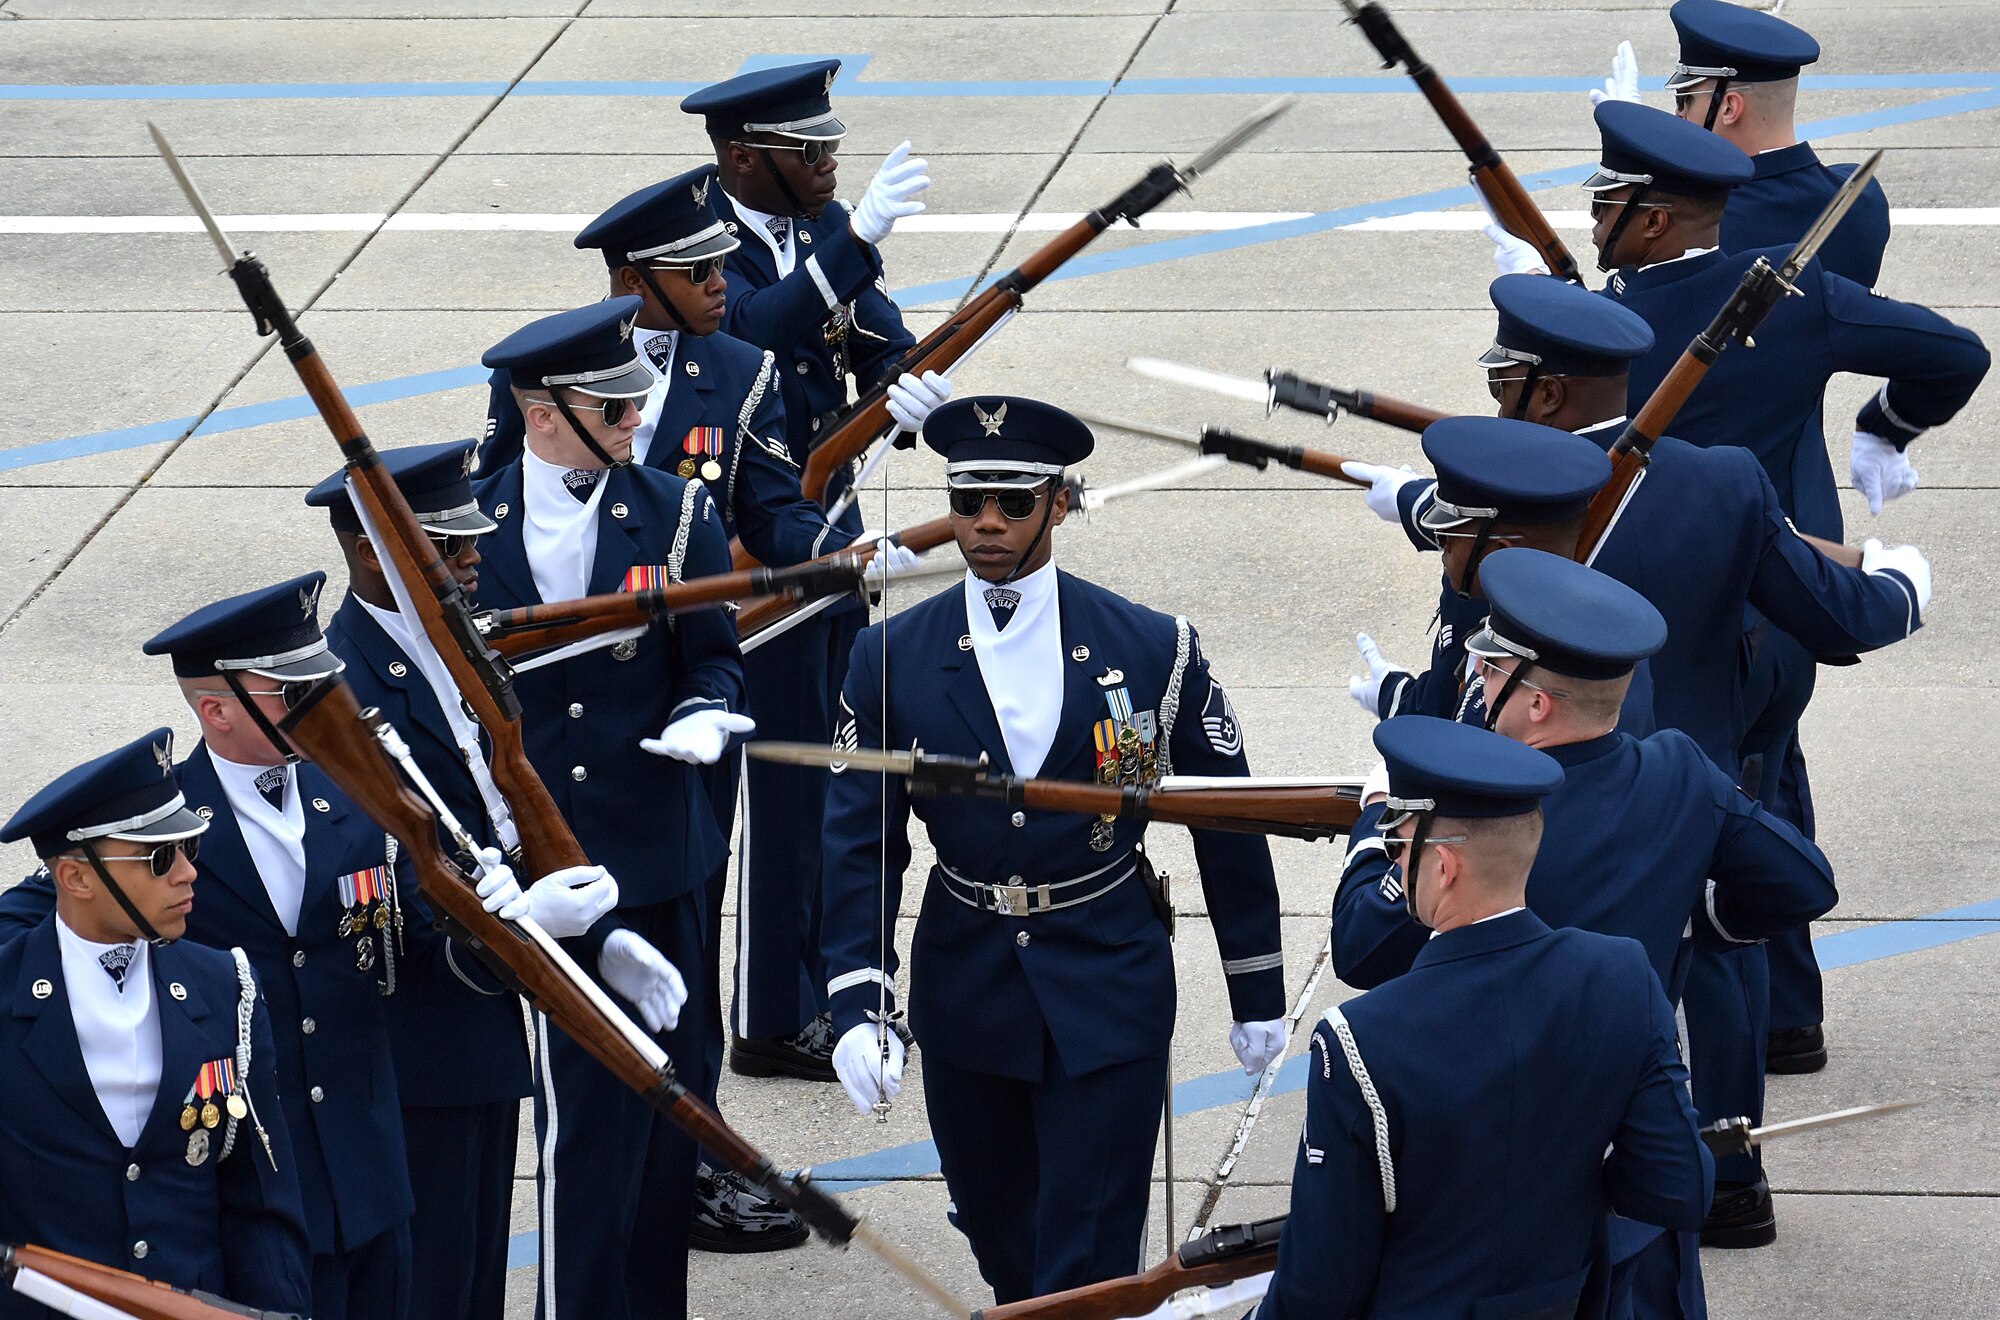 The U.S. Air Force Honor Guard Drill Team debuts their 2019 routine in front of Keesler leadership and 81st Training Group Airmen on the Levitow Training Support Facility drill pad at Keesler Air Force Base, Mississippi, Feb. 8, 2019. They are the nation's most elite honor guard, serving the President of the United States, the Air Force's most senior leaders and performing nationwide for the American public. The team comes to Keesler every year for five weeks to develop a new routine that they will use throughout the year. (U.S. Air Force photo by 2nd Lt. Jantzen Floate)